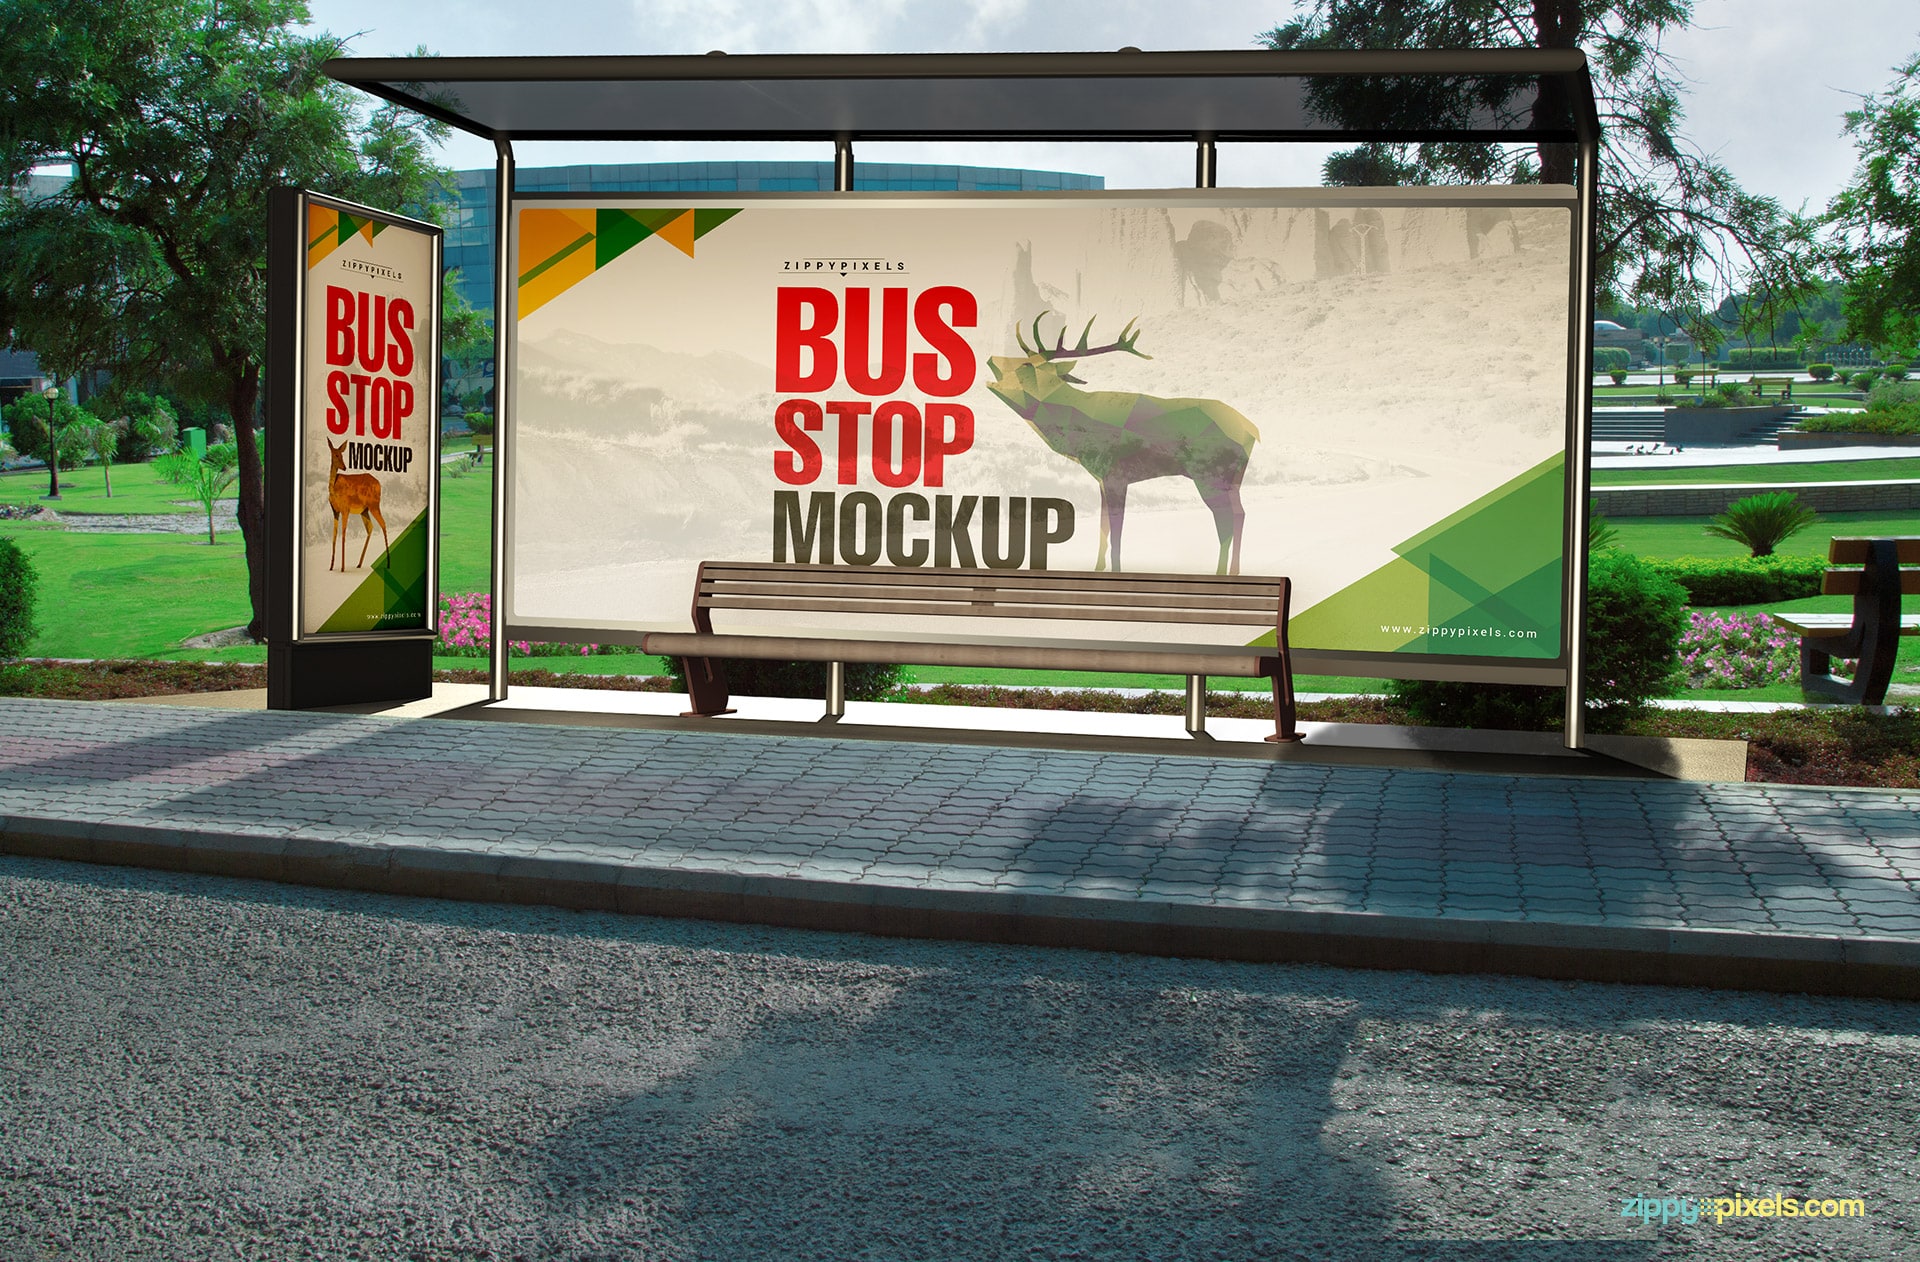 advertisement on roadways buses